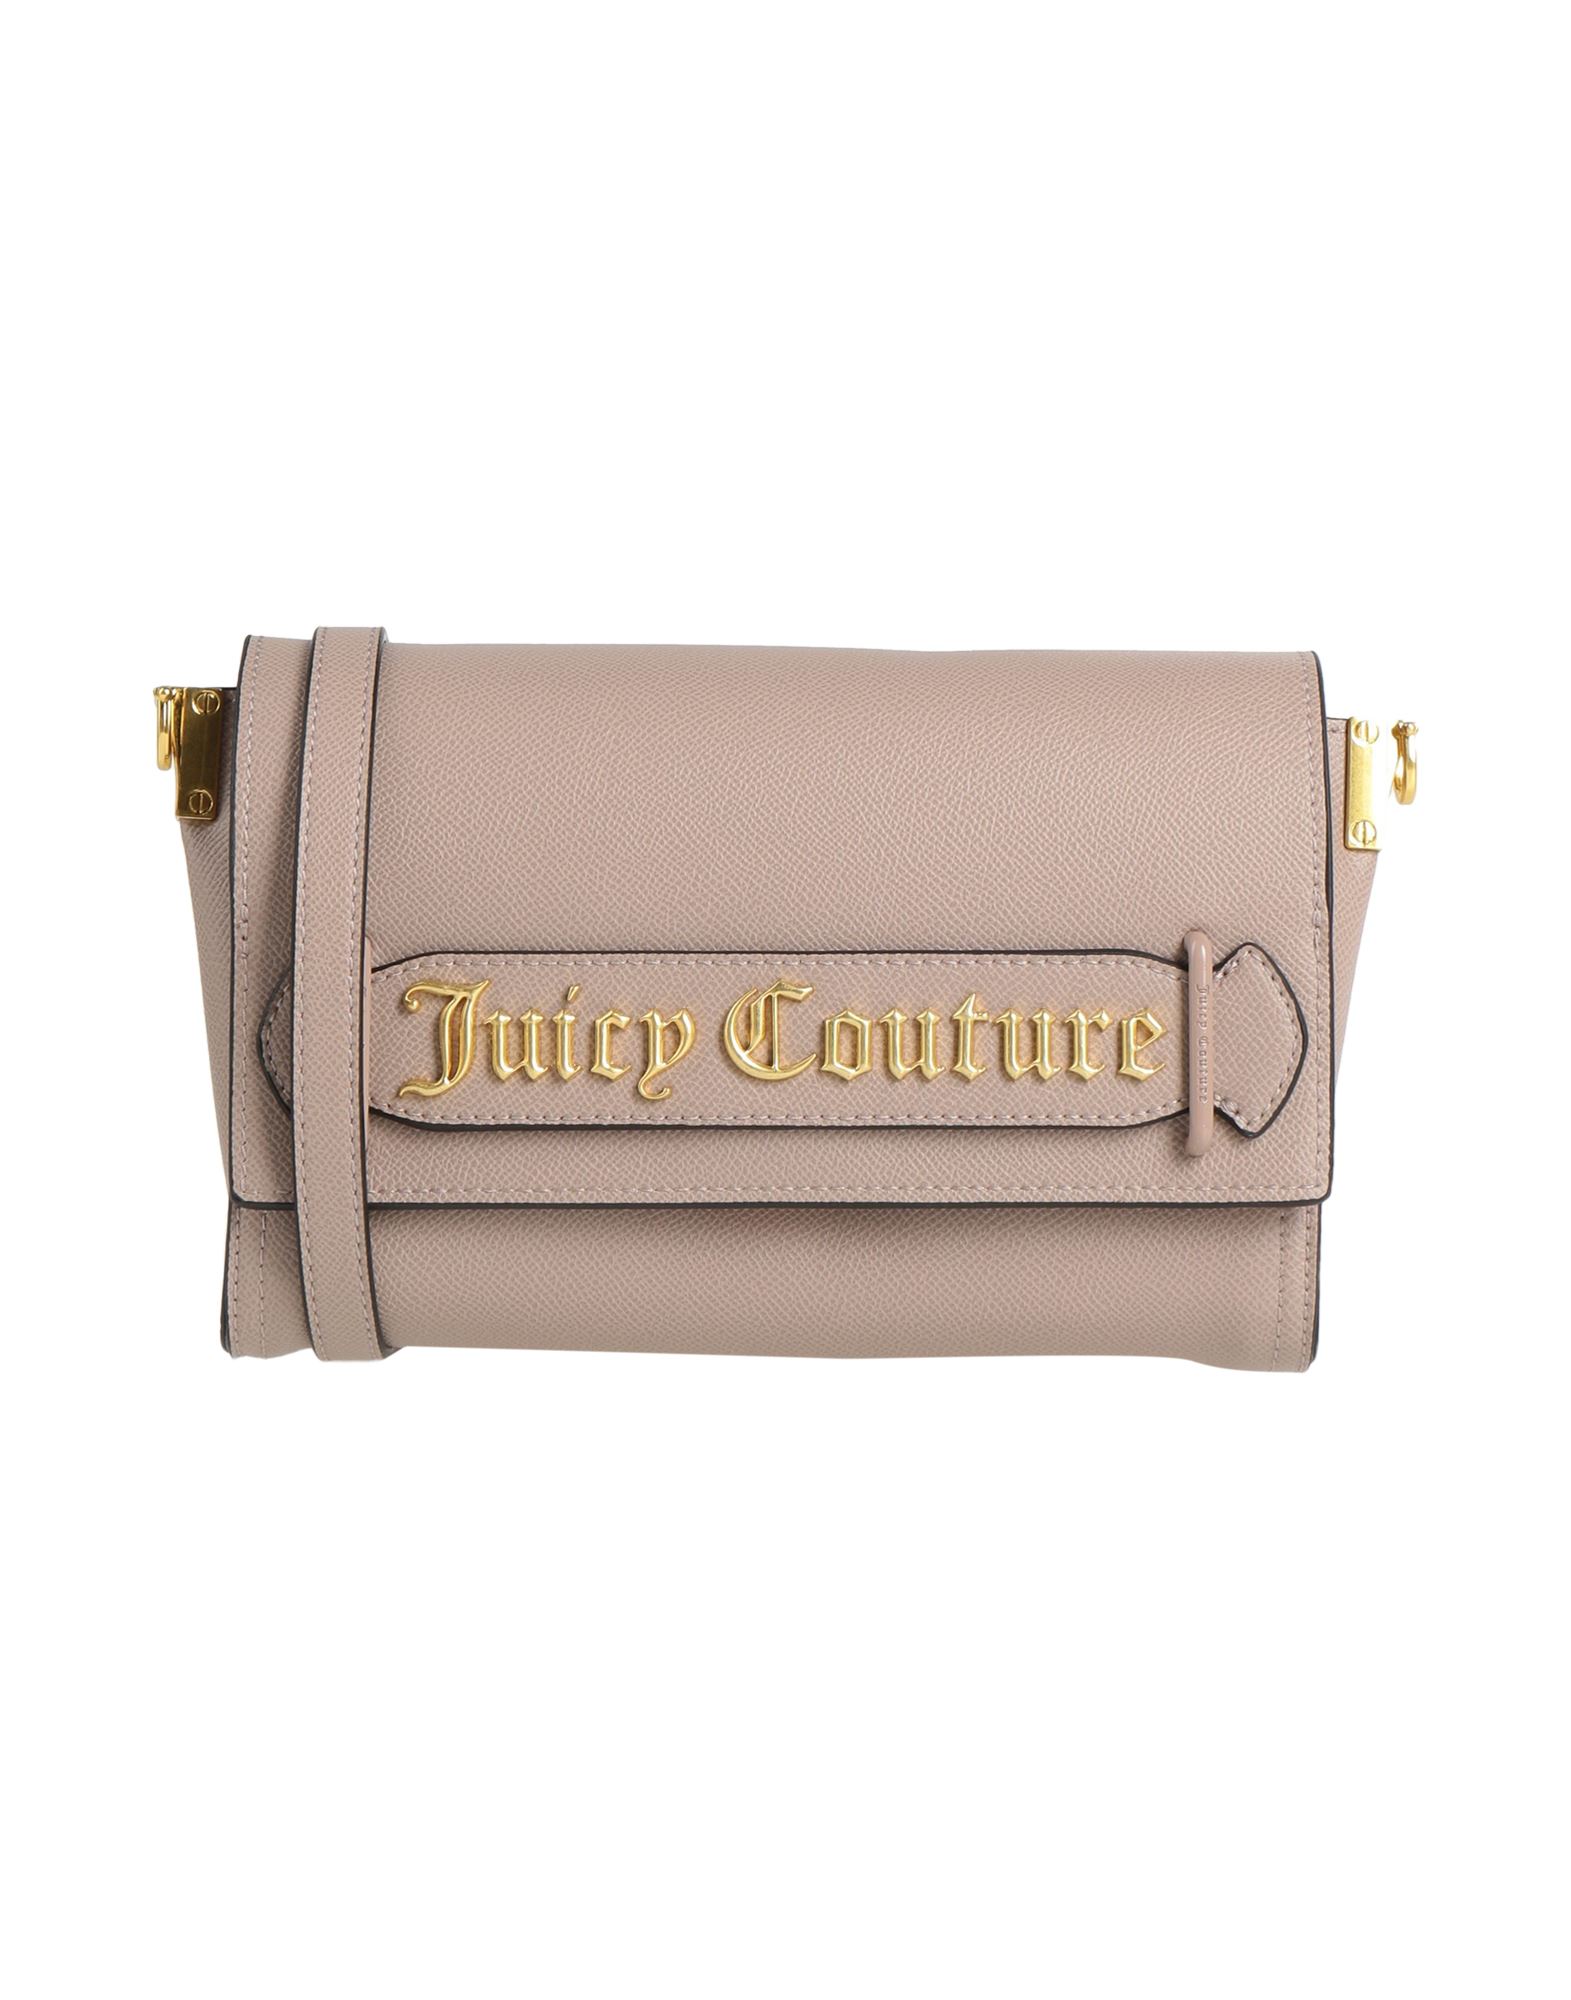 Juicy Couture Handbags In Blush